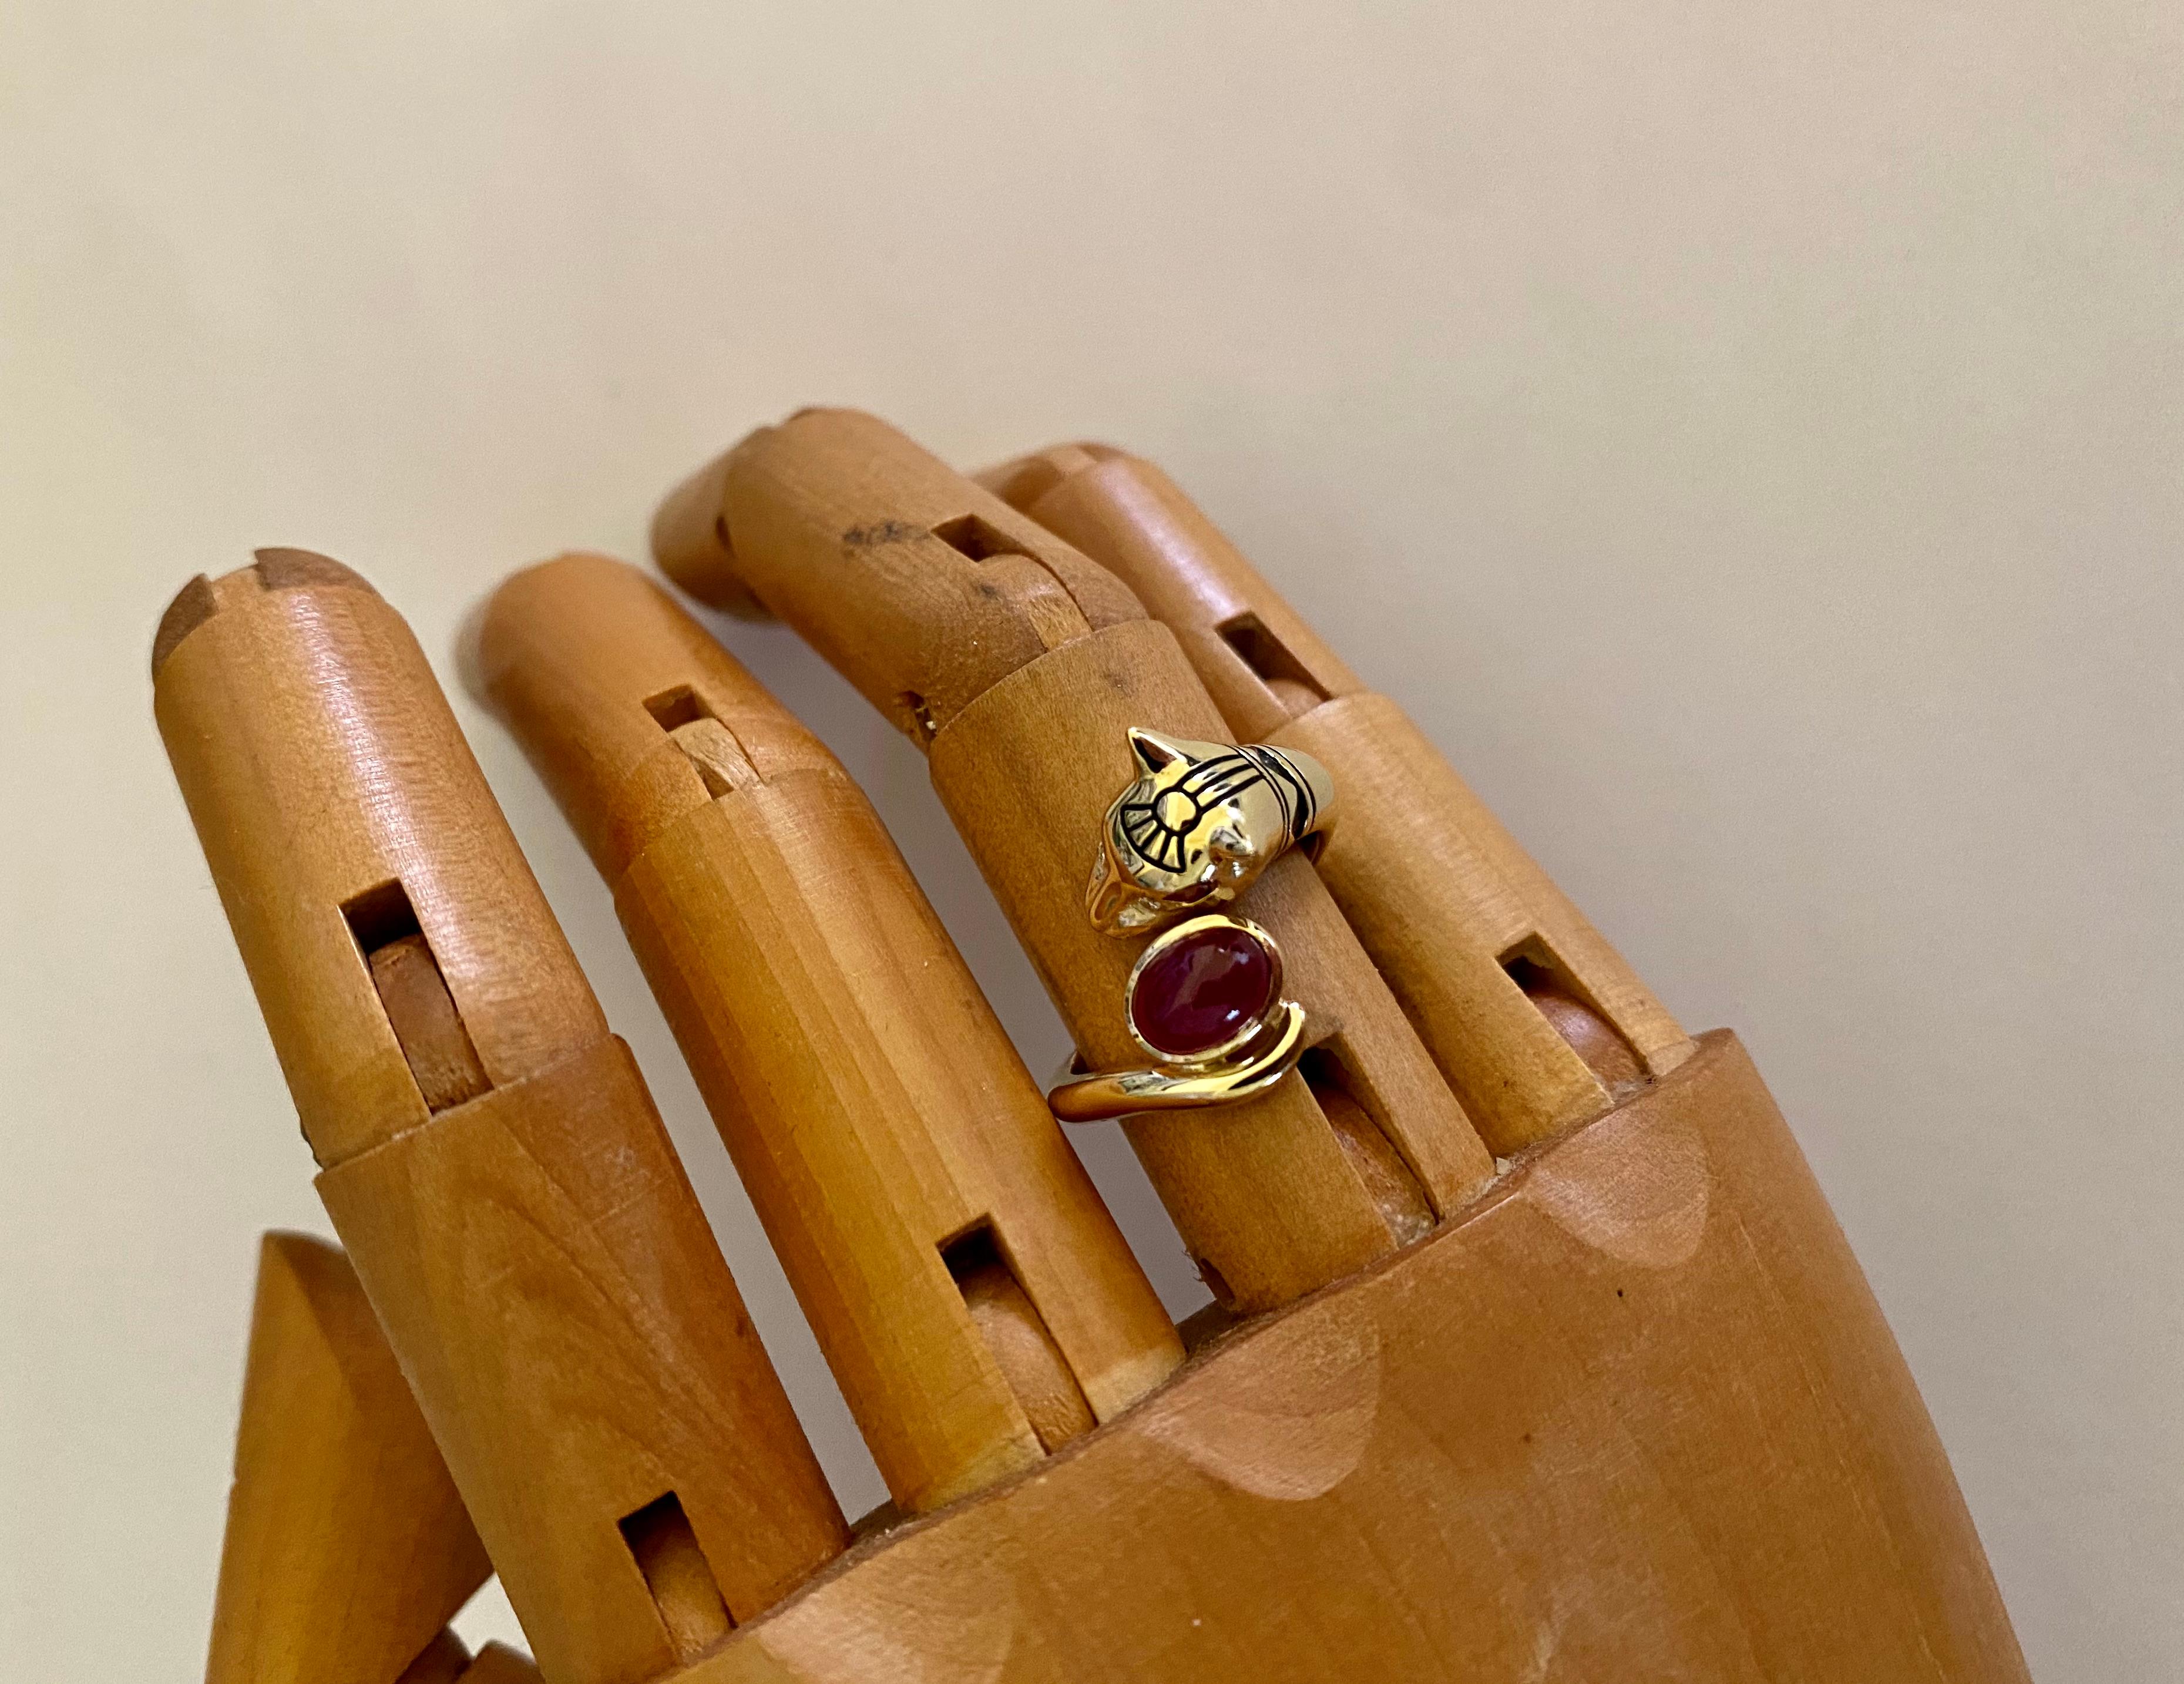 Ruby and diamonds give prominence to this Egyptian Revival cat ring.  Bastet, also known as Bast, is the fierce ancient Egyptian goddess worshiped in the form of a lion and later, after its domestication, a cat. This 18k yellow gold wearable